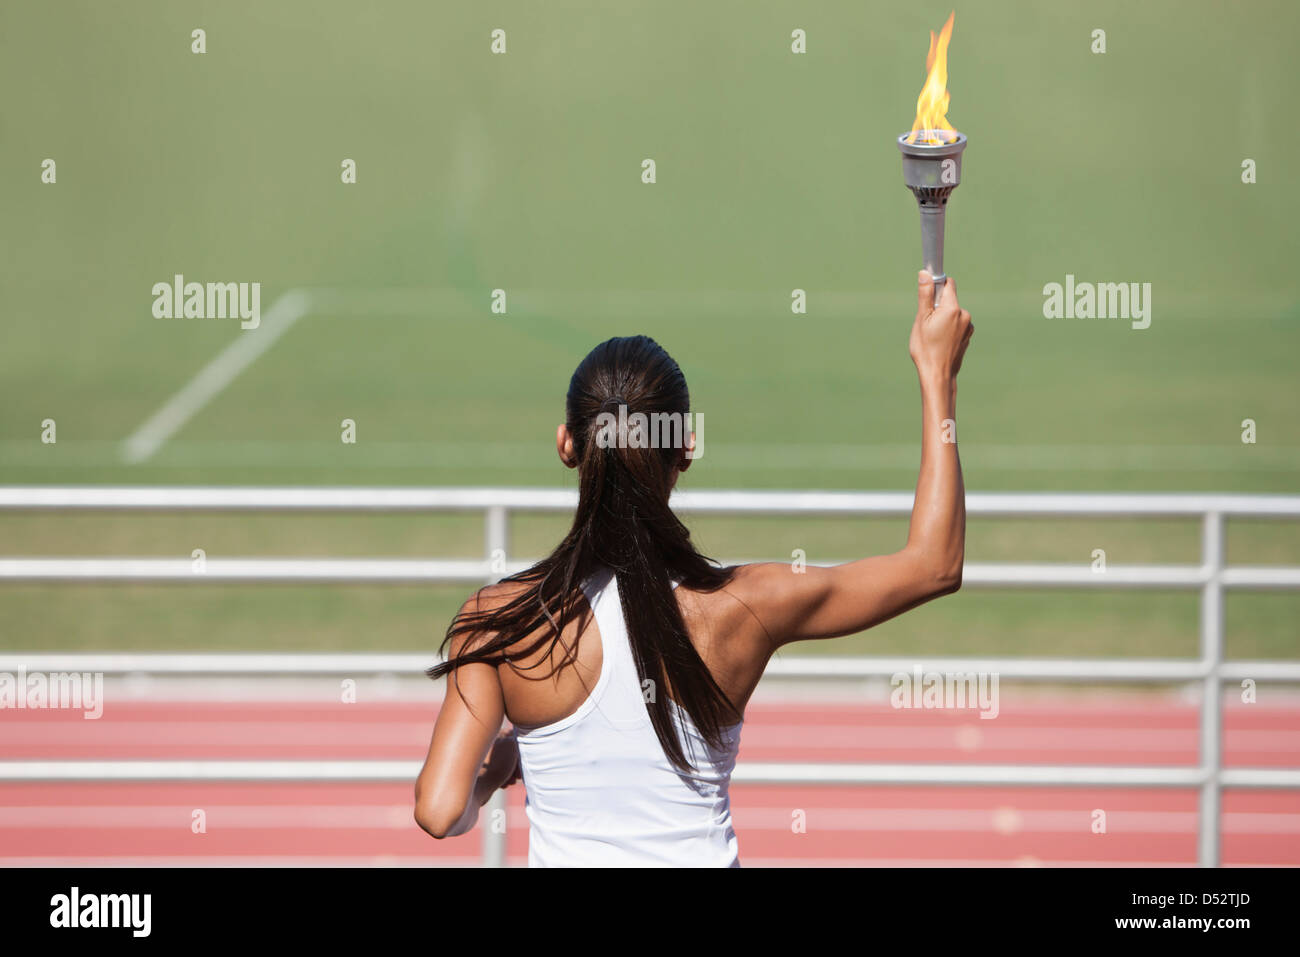 Female athlete holding up flaming torch, rear view Stock Photo